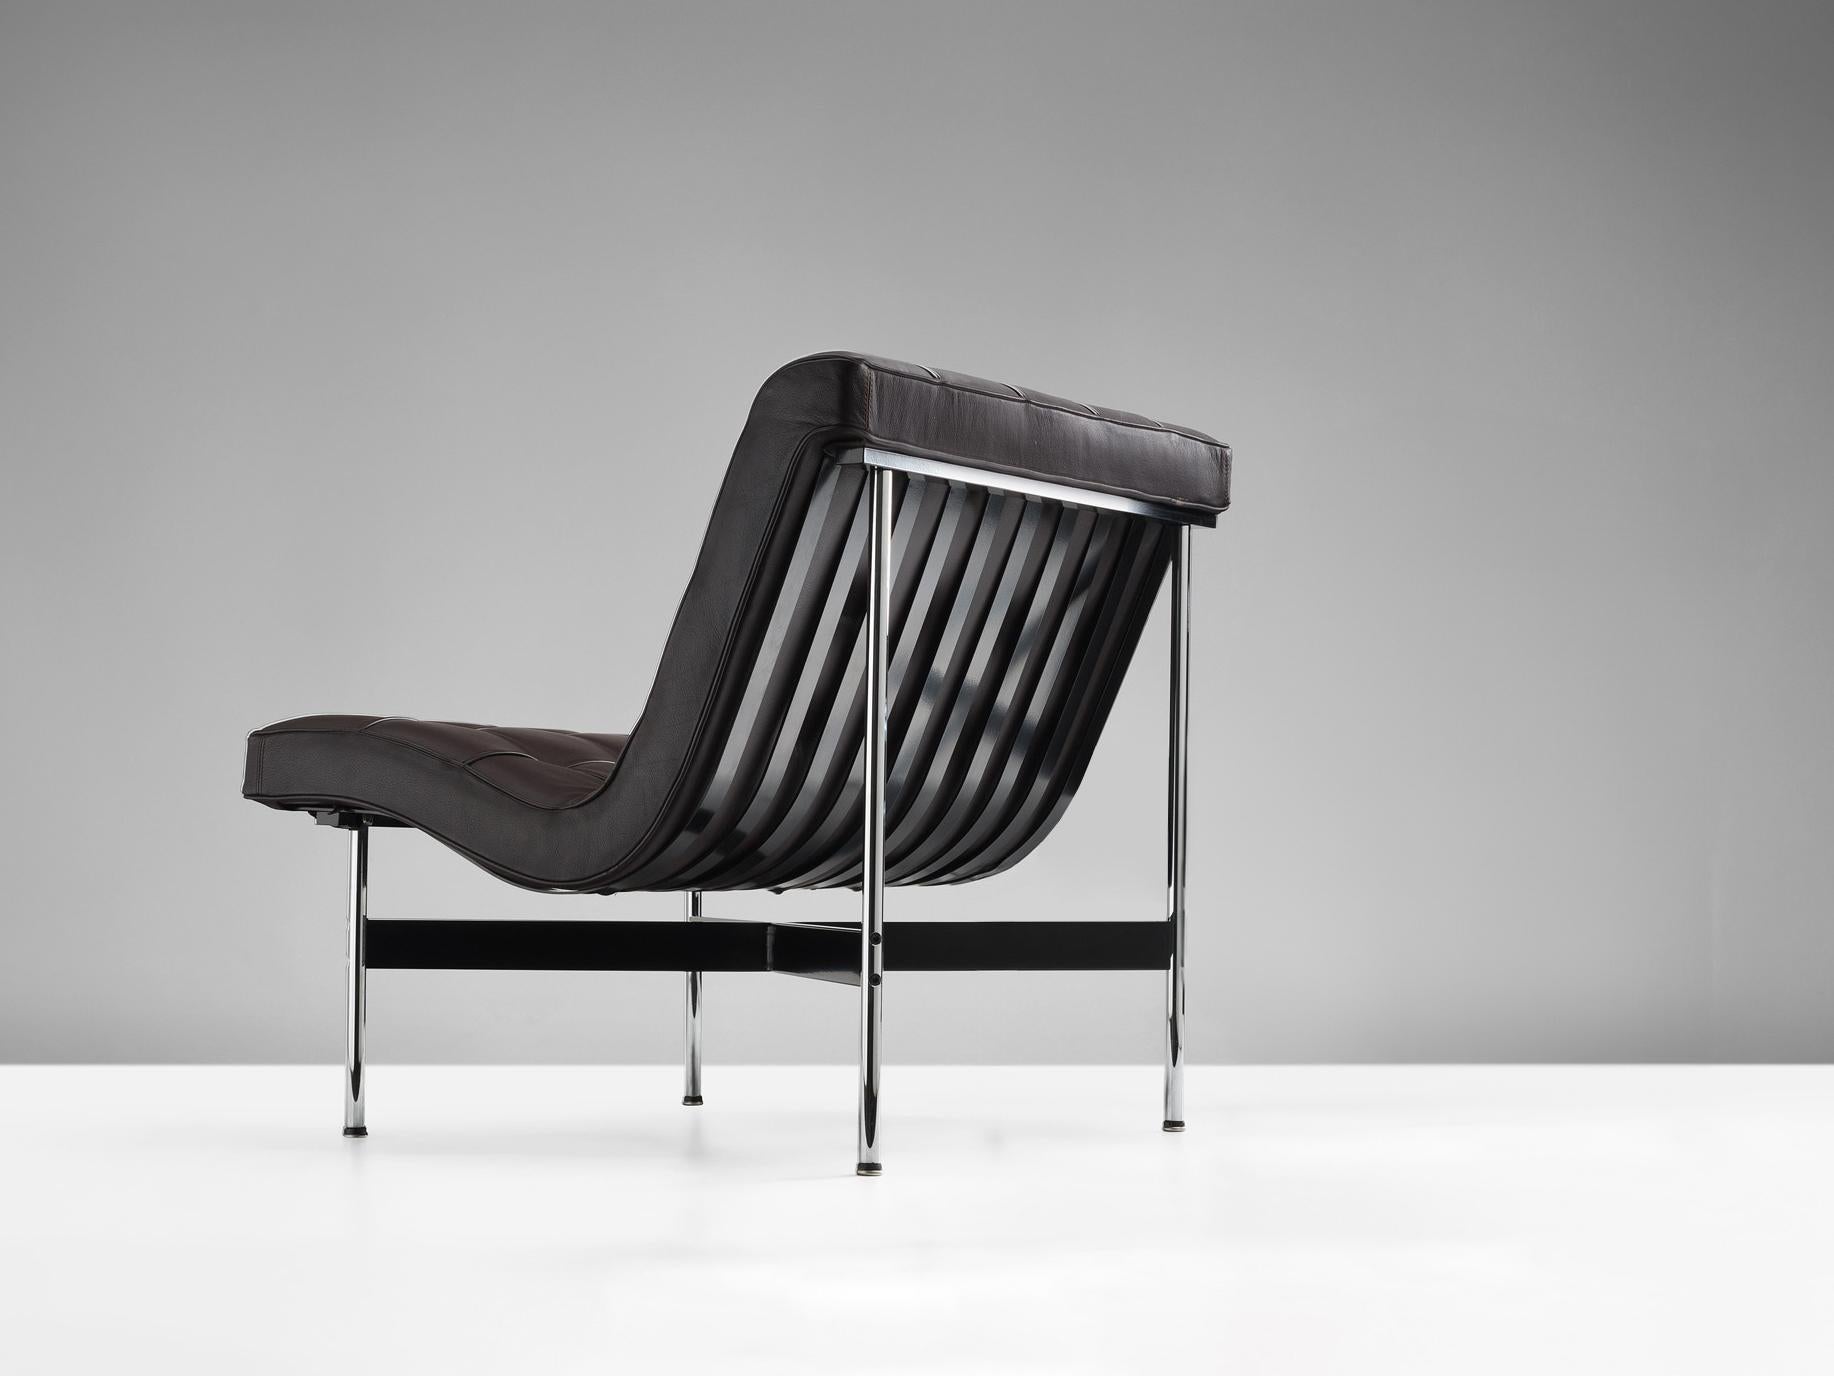 William Katavolos, Ross Littell and Douglas Kelley for Laverne International, lounge chair, faux leather, steel, 1950s design, 1980s production, United States.

Lounge chair designed by William Katavolos, Ross Littell and Douglas Kelley for Laverne